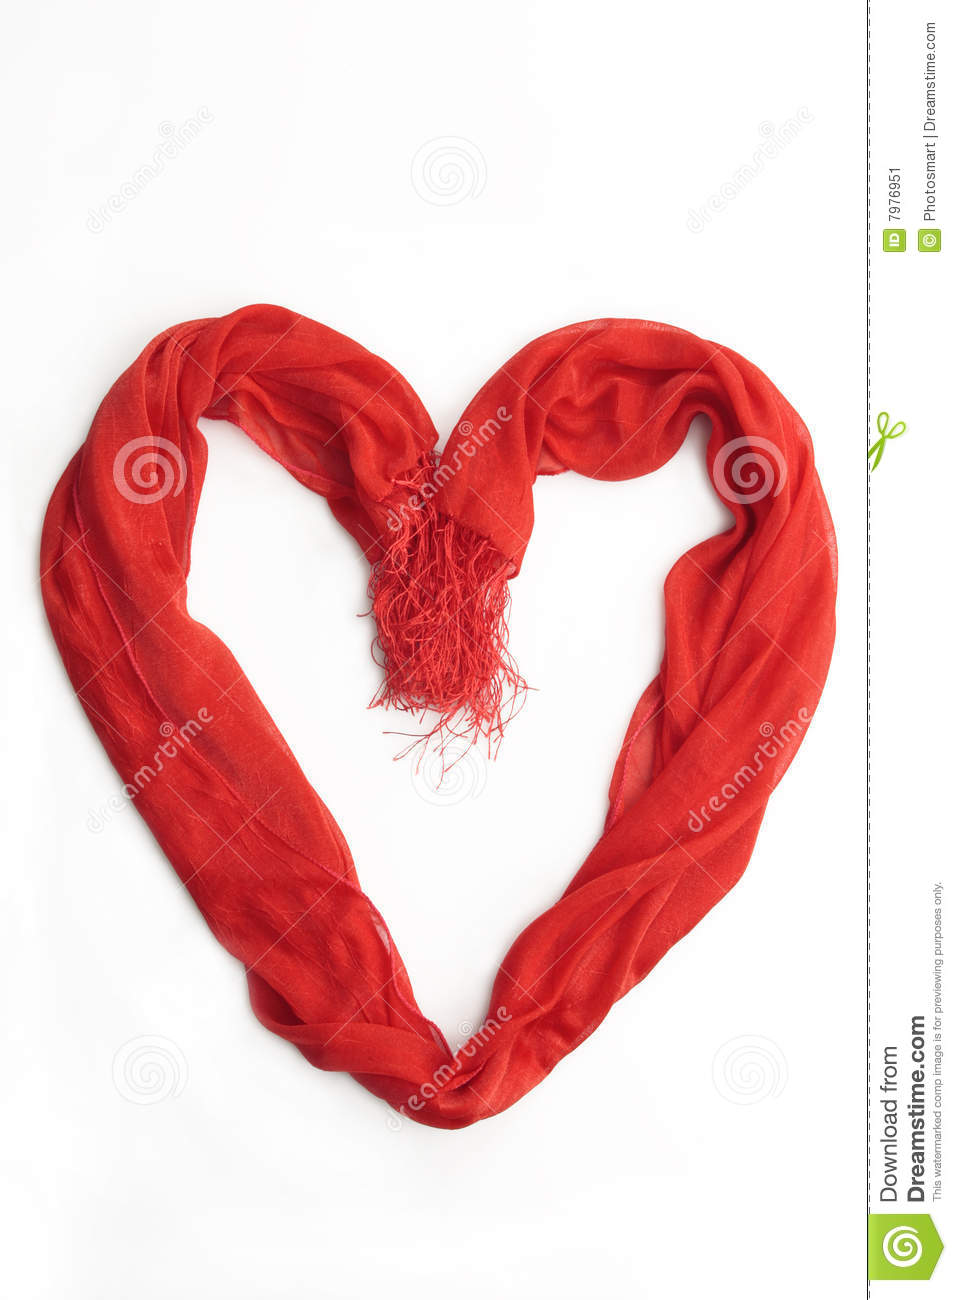 Heart Made Of A Red Scarf Stock Image   Image  7976951